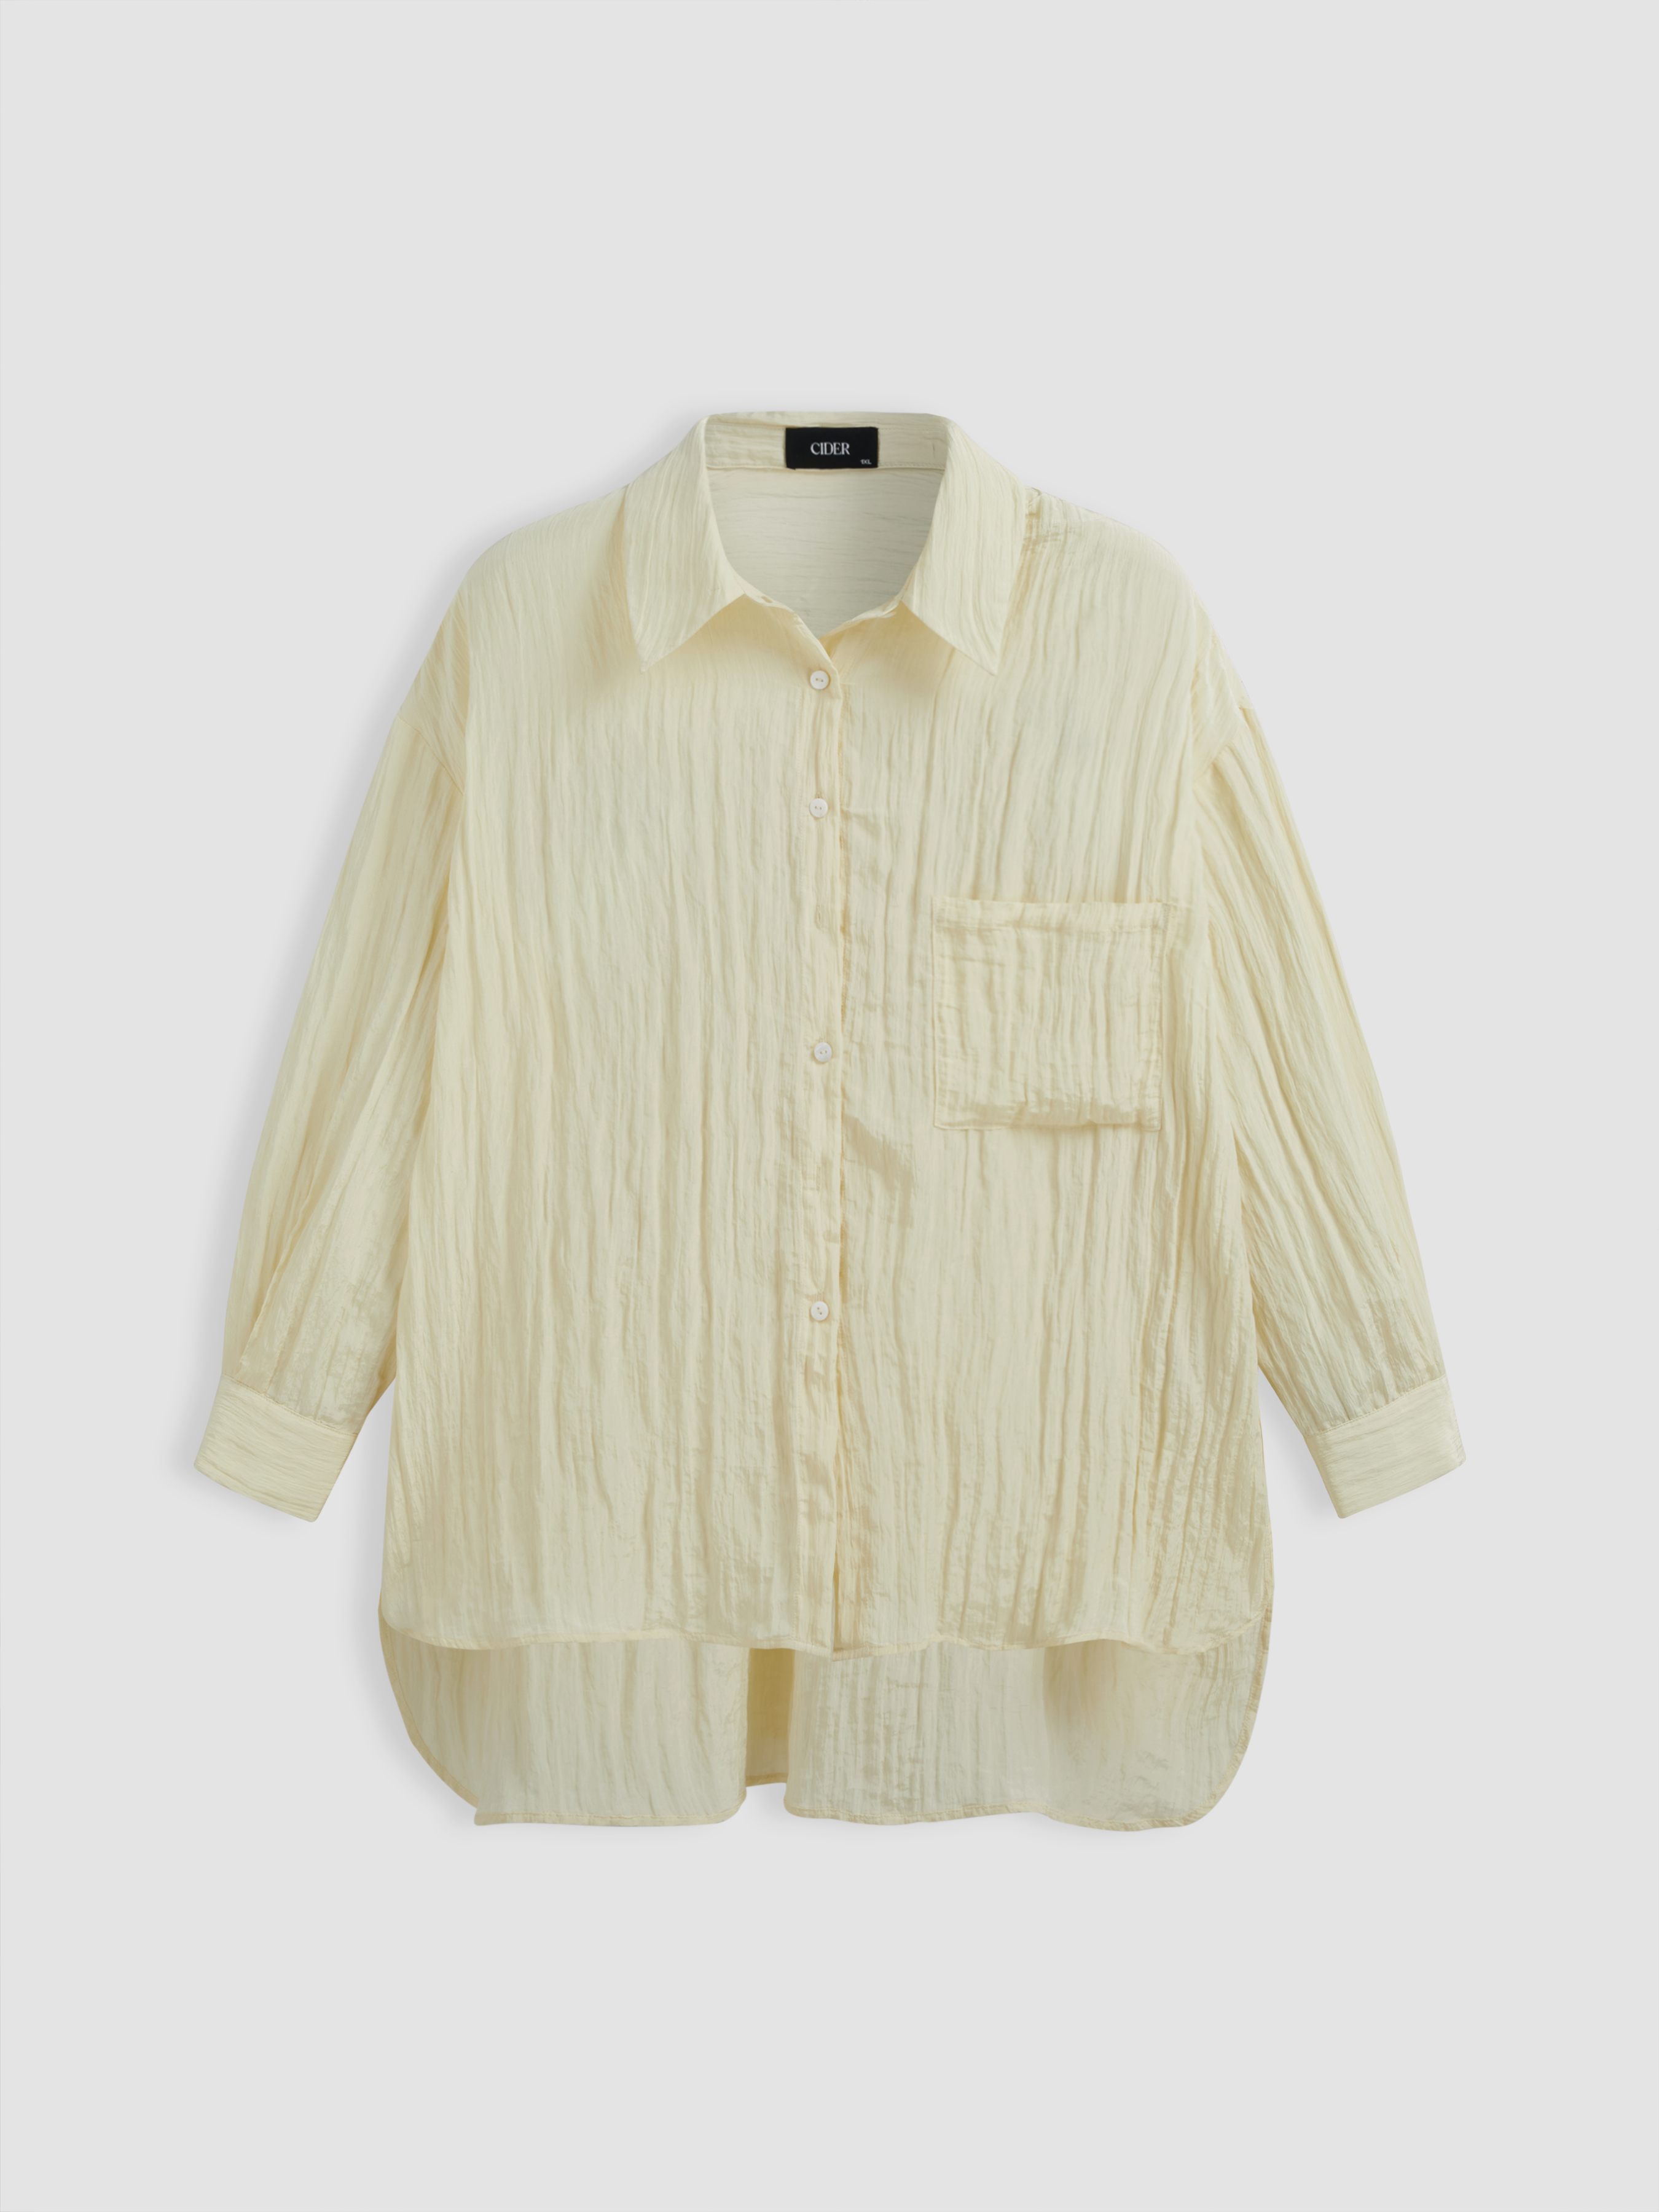 Long Sleeve Tops - Cider